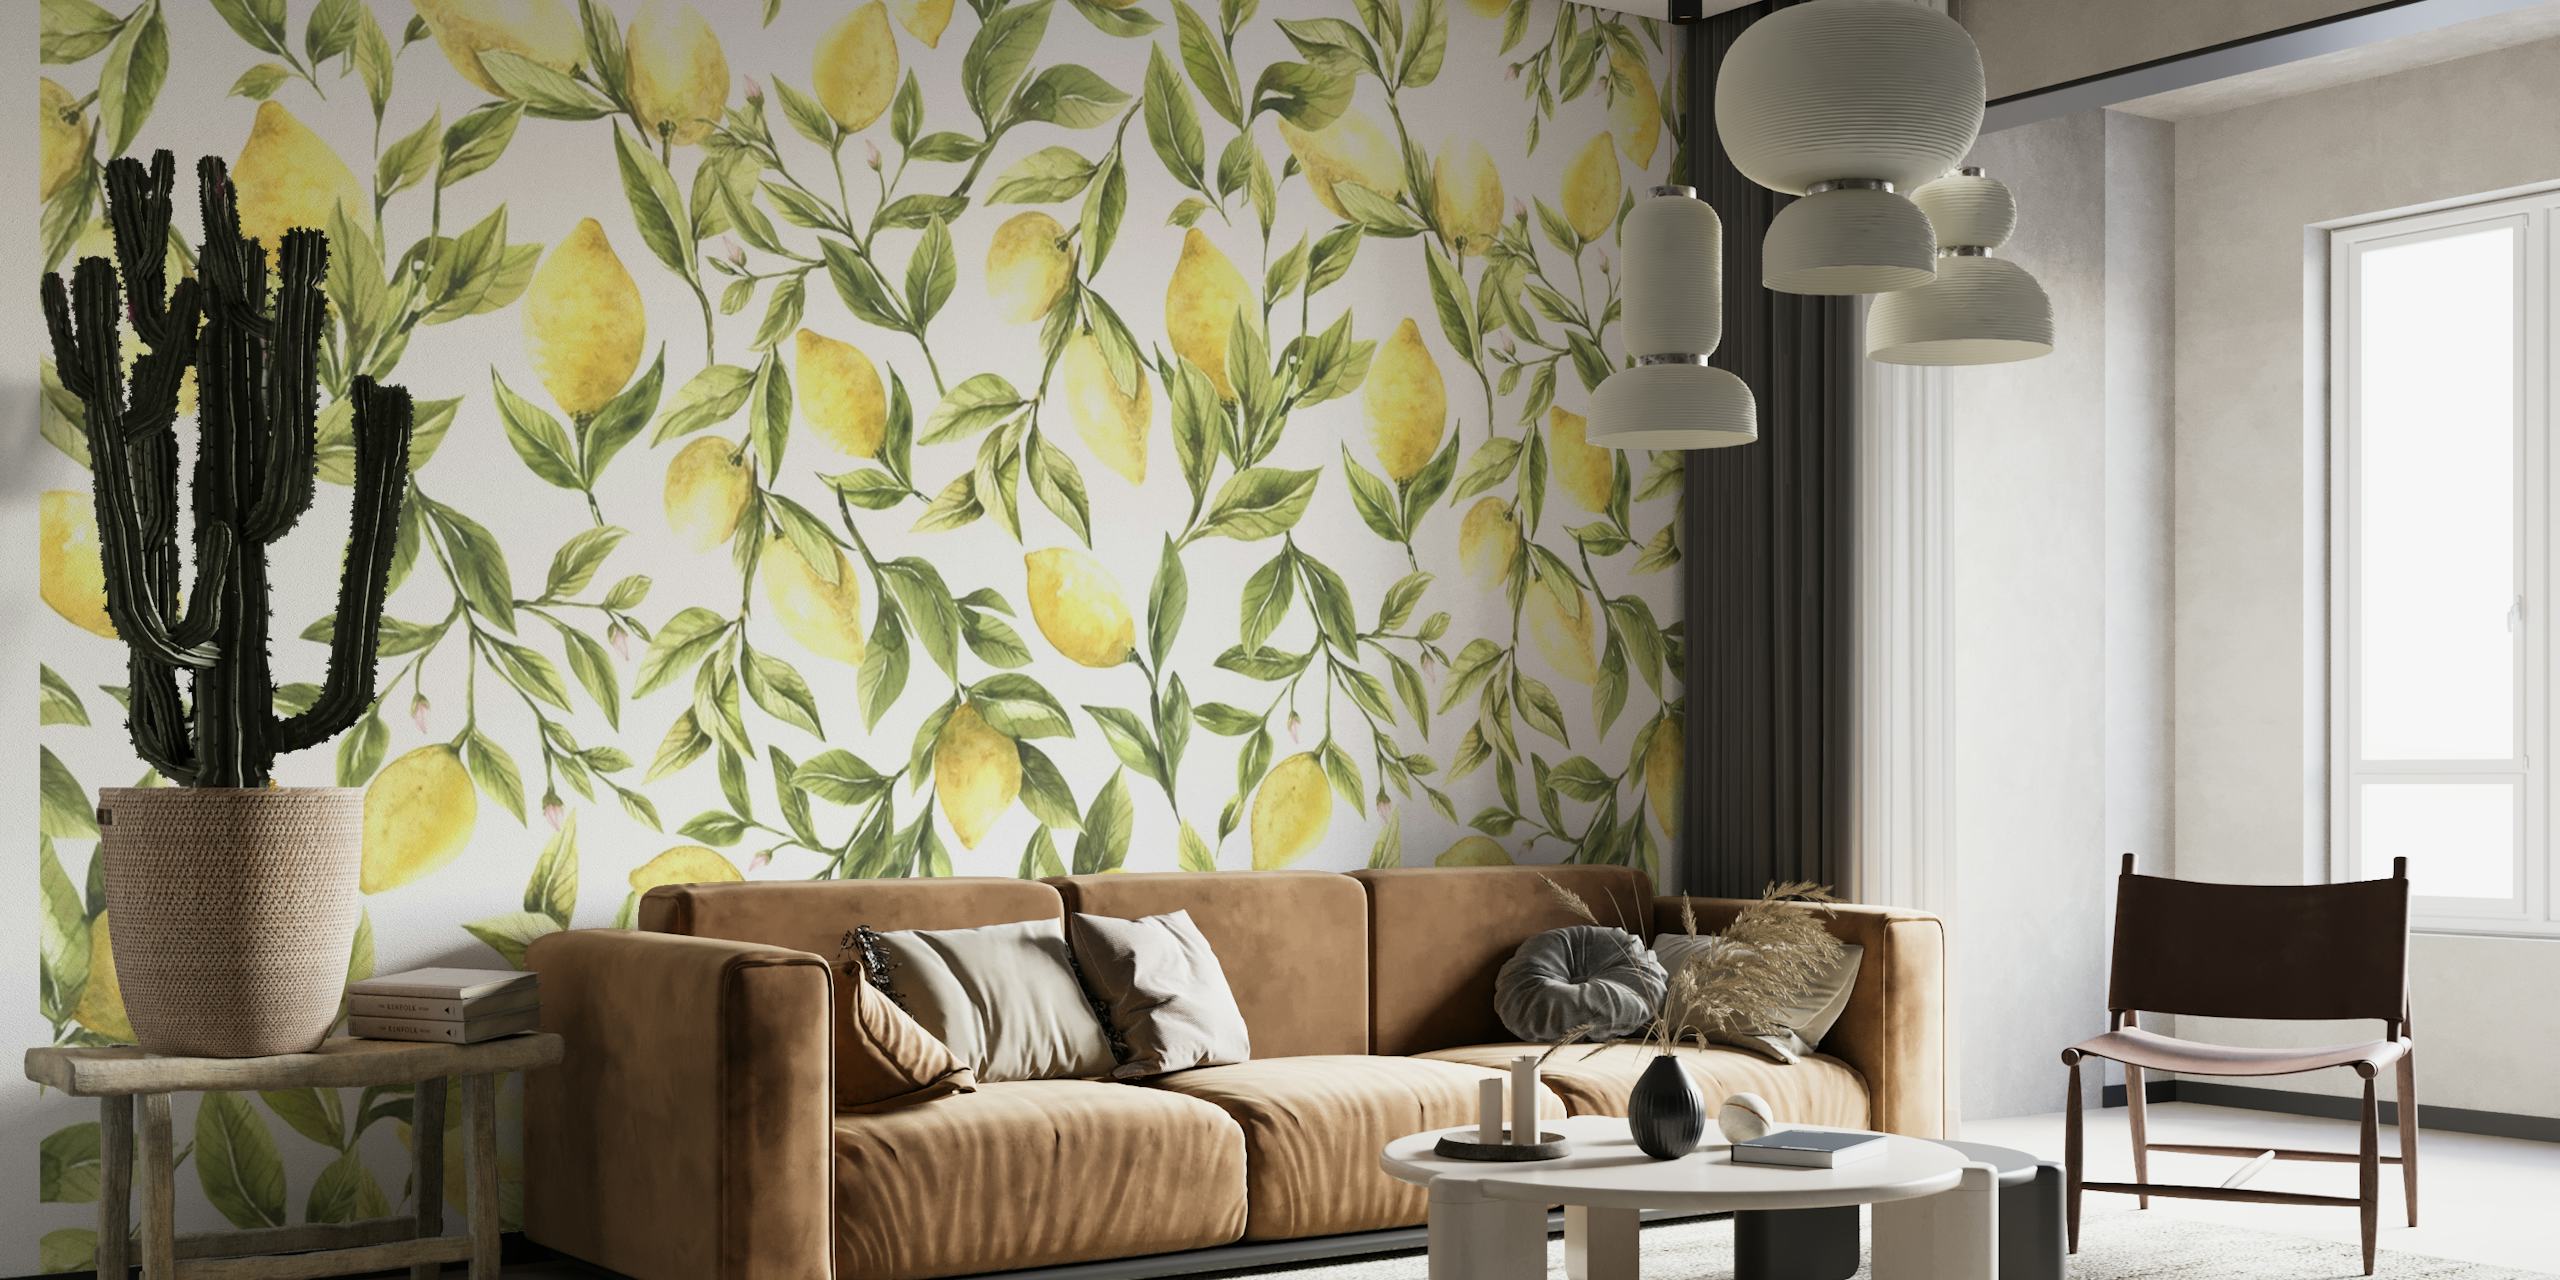 Lively and refreshing pattern of yellow lemons with green foliage for a wall mural.